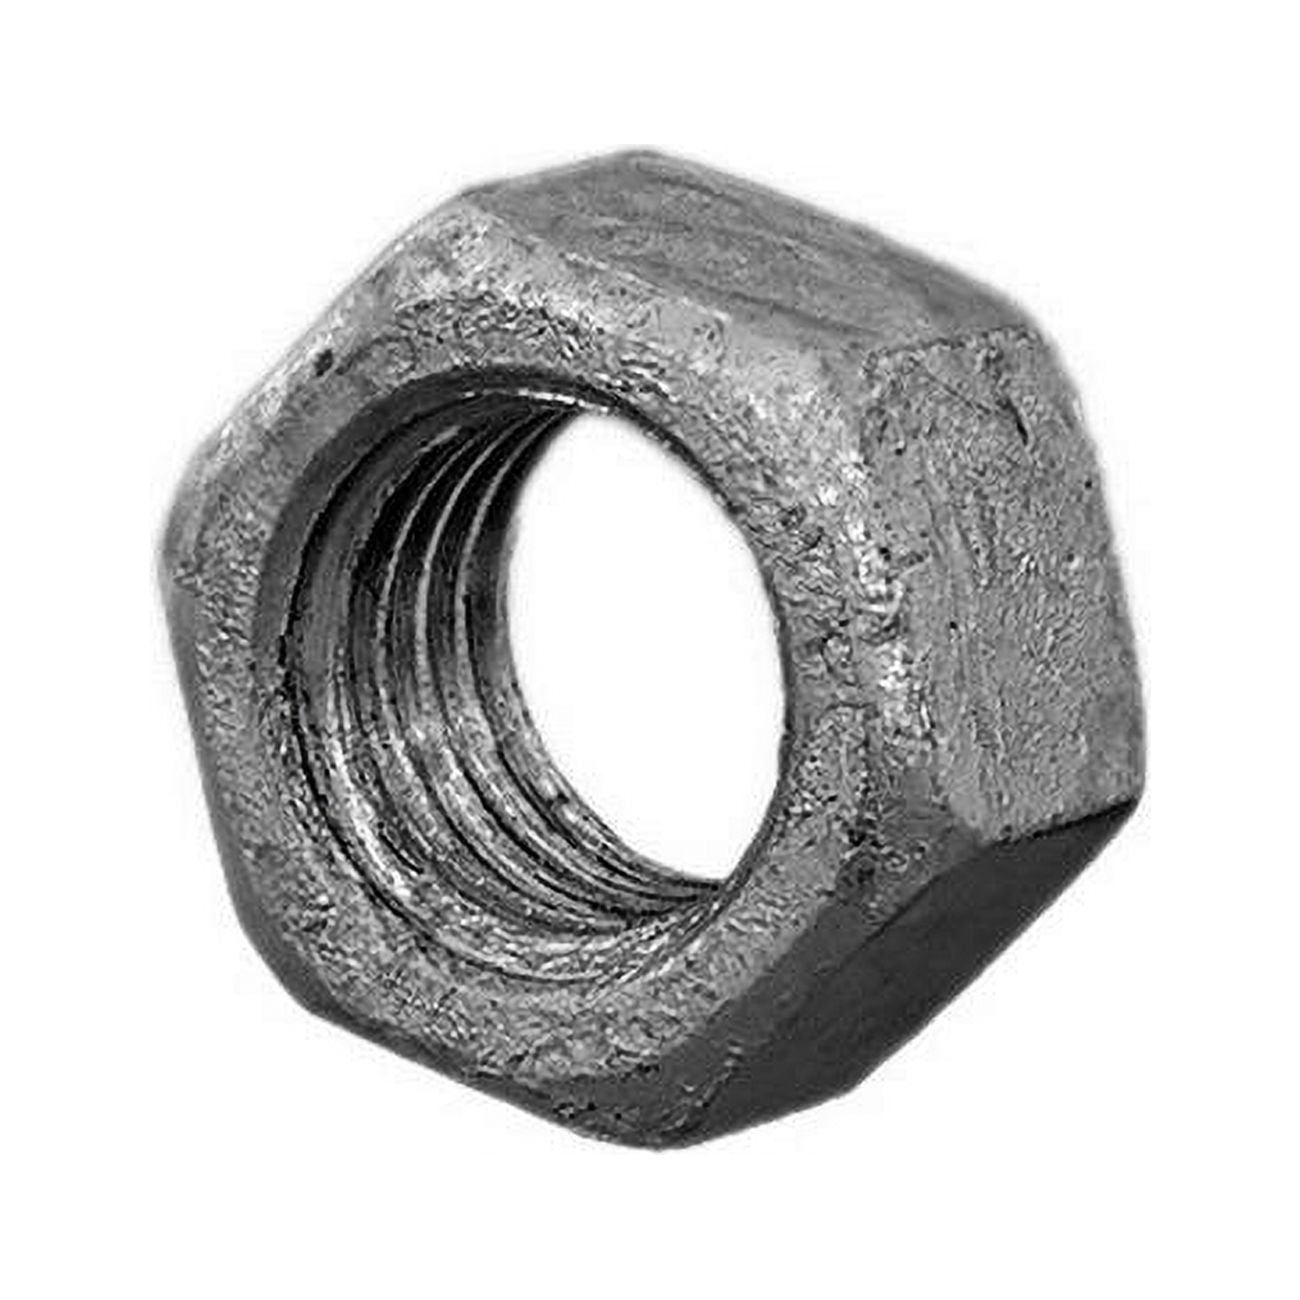 Picture of A&A Bolt & Screw V2672HDG 0.75 in. Nut for Flange Bolt